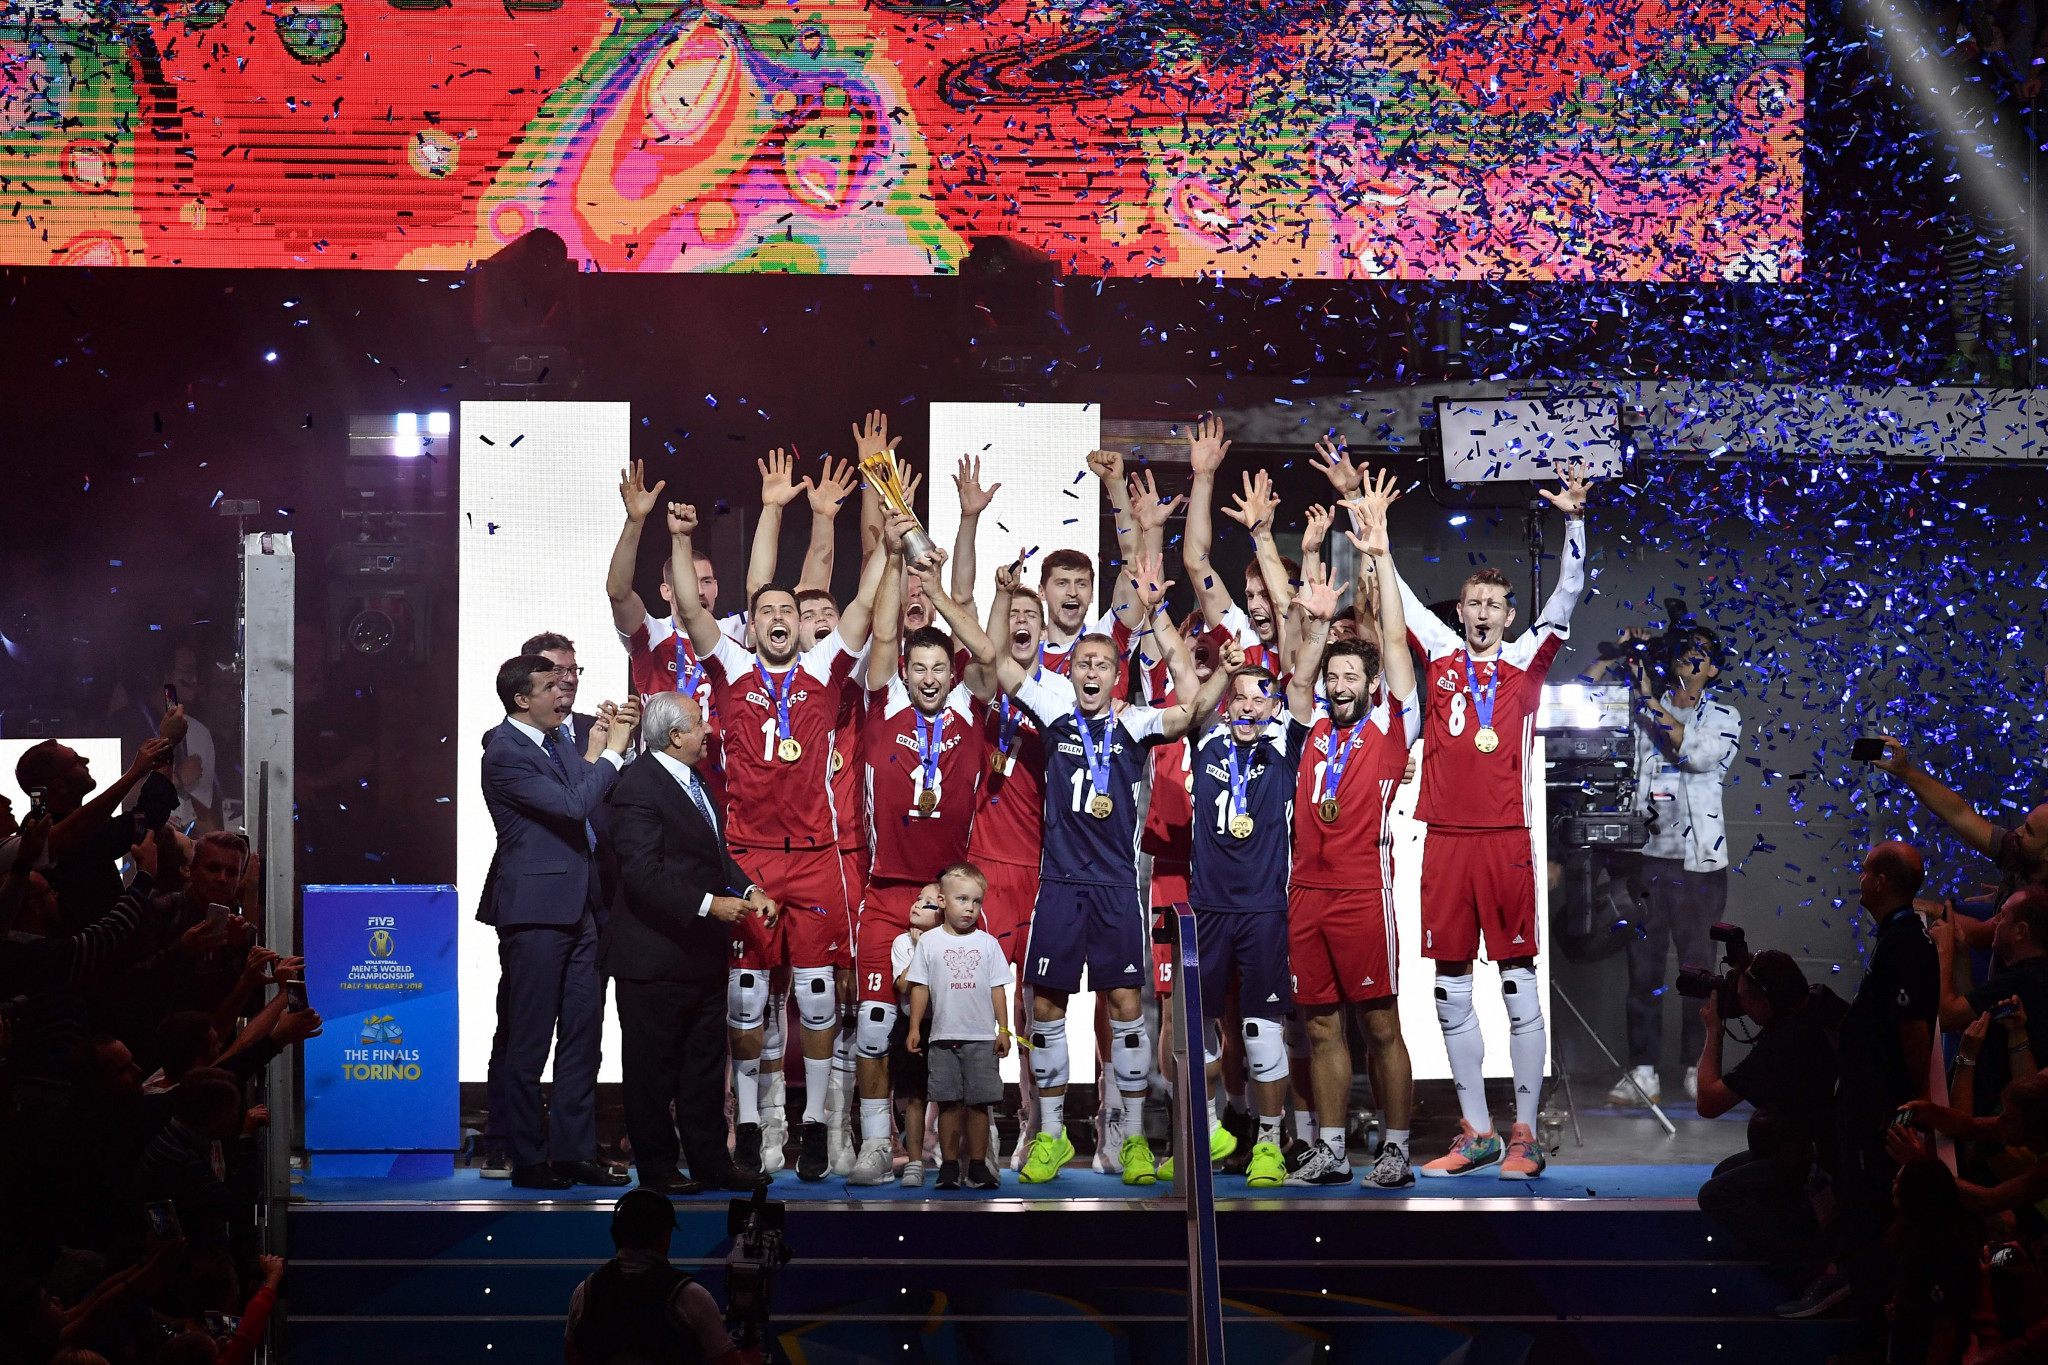 Poland celebrate winning the FIVB Men's Volleyball World Championships in Turin, Italy ©Getty Images